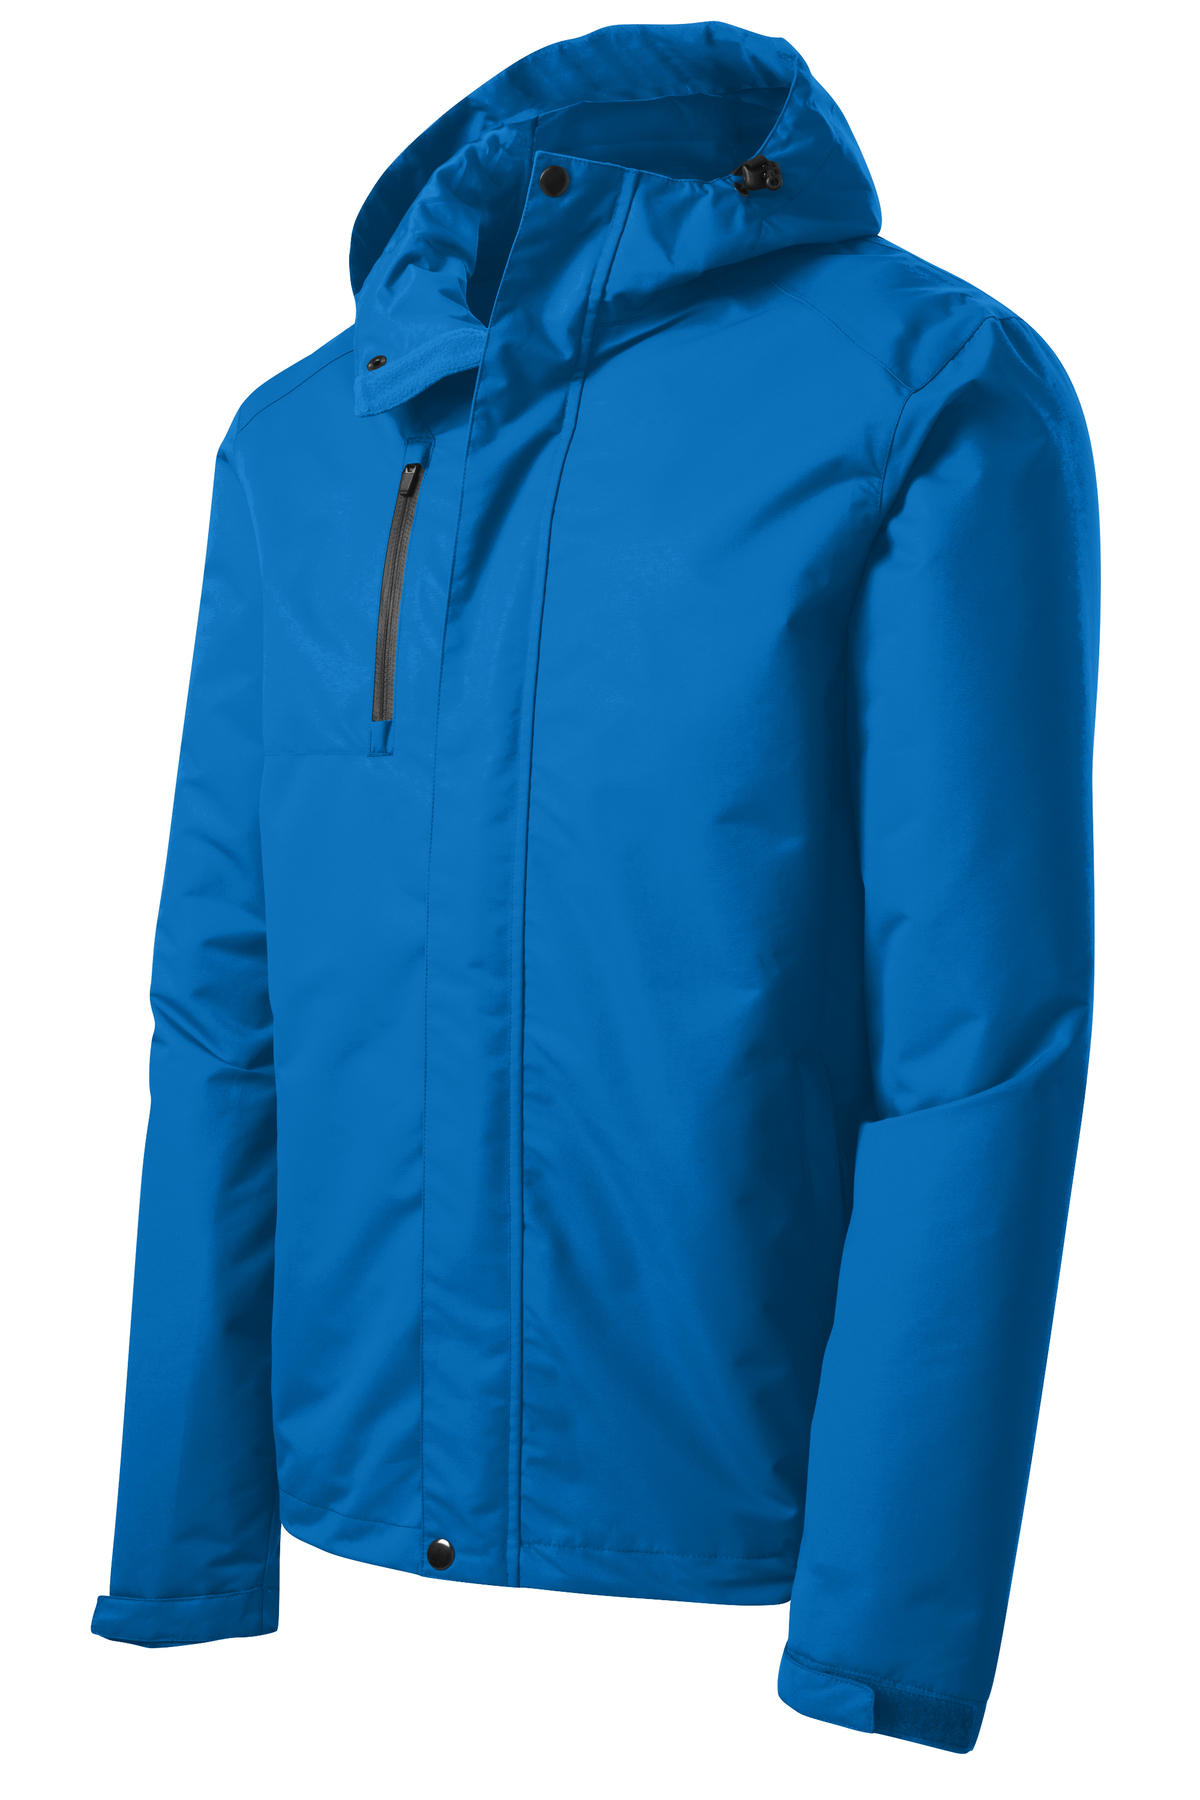 Port Authority All-Conditions Jacket | Product | Company Casuals